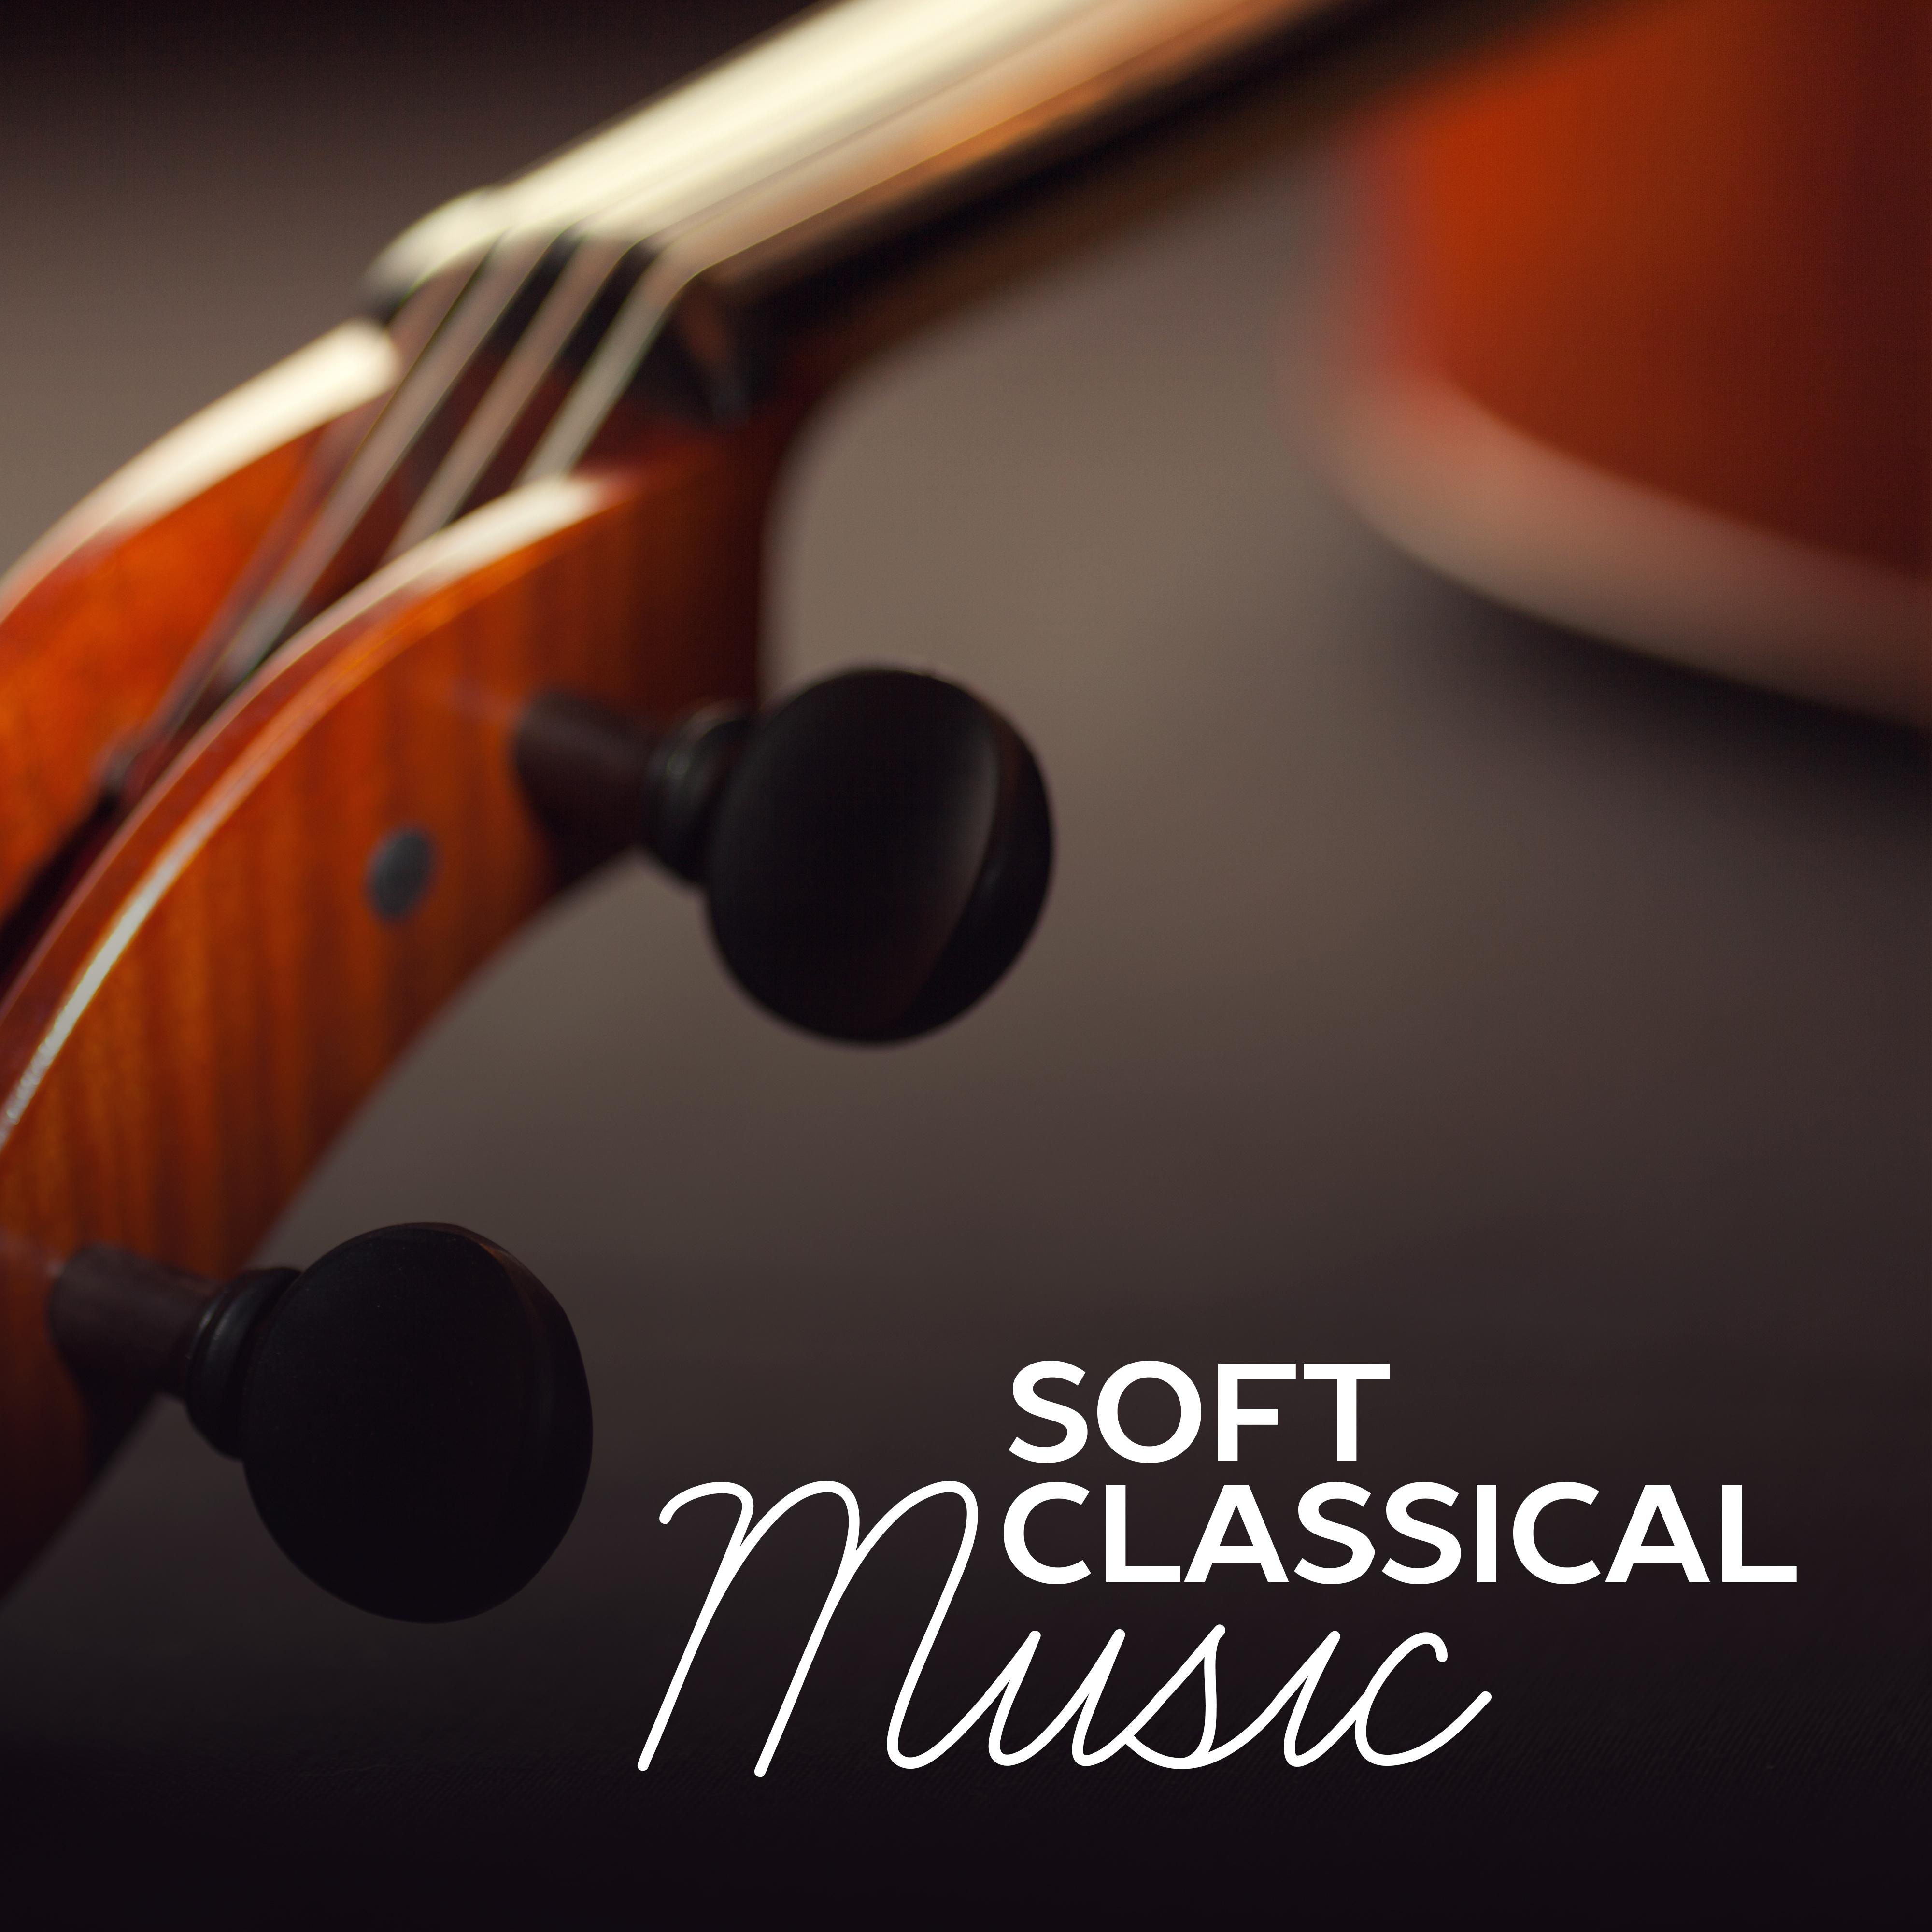 Soft Classical Music  Anti Stress Sounds, Peaceful Mind, Composers After Work, Mozart, Bach